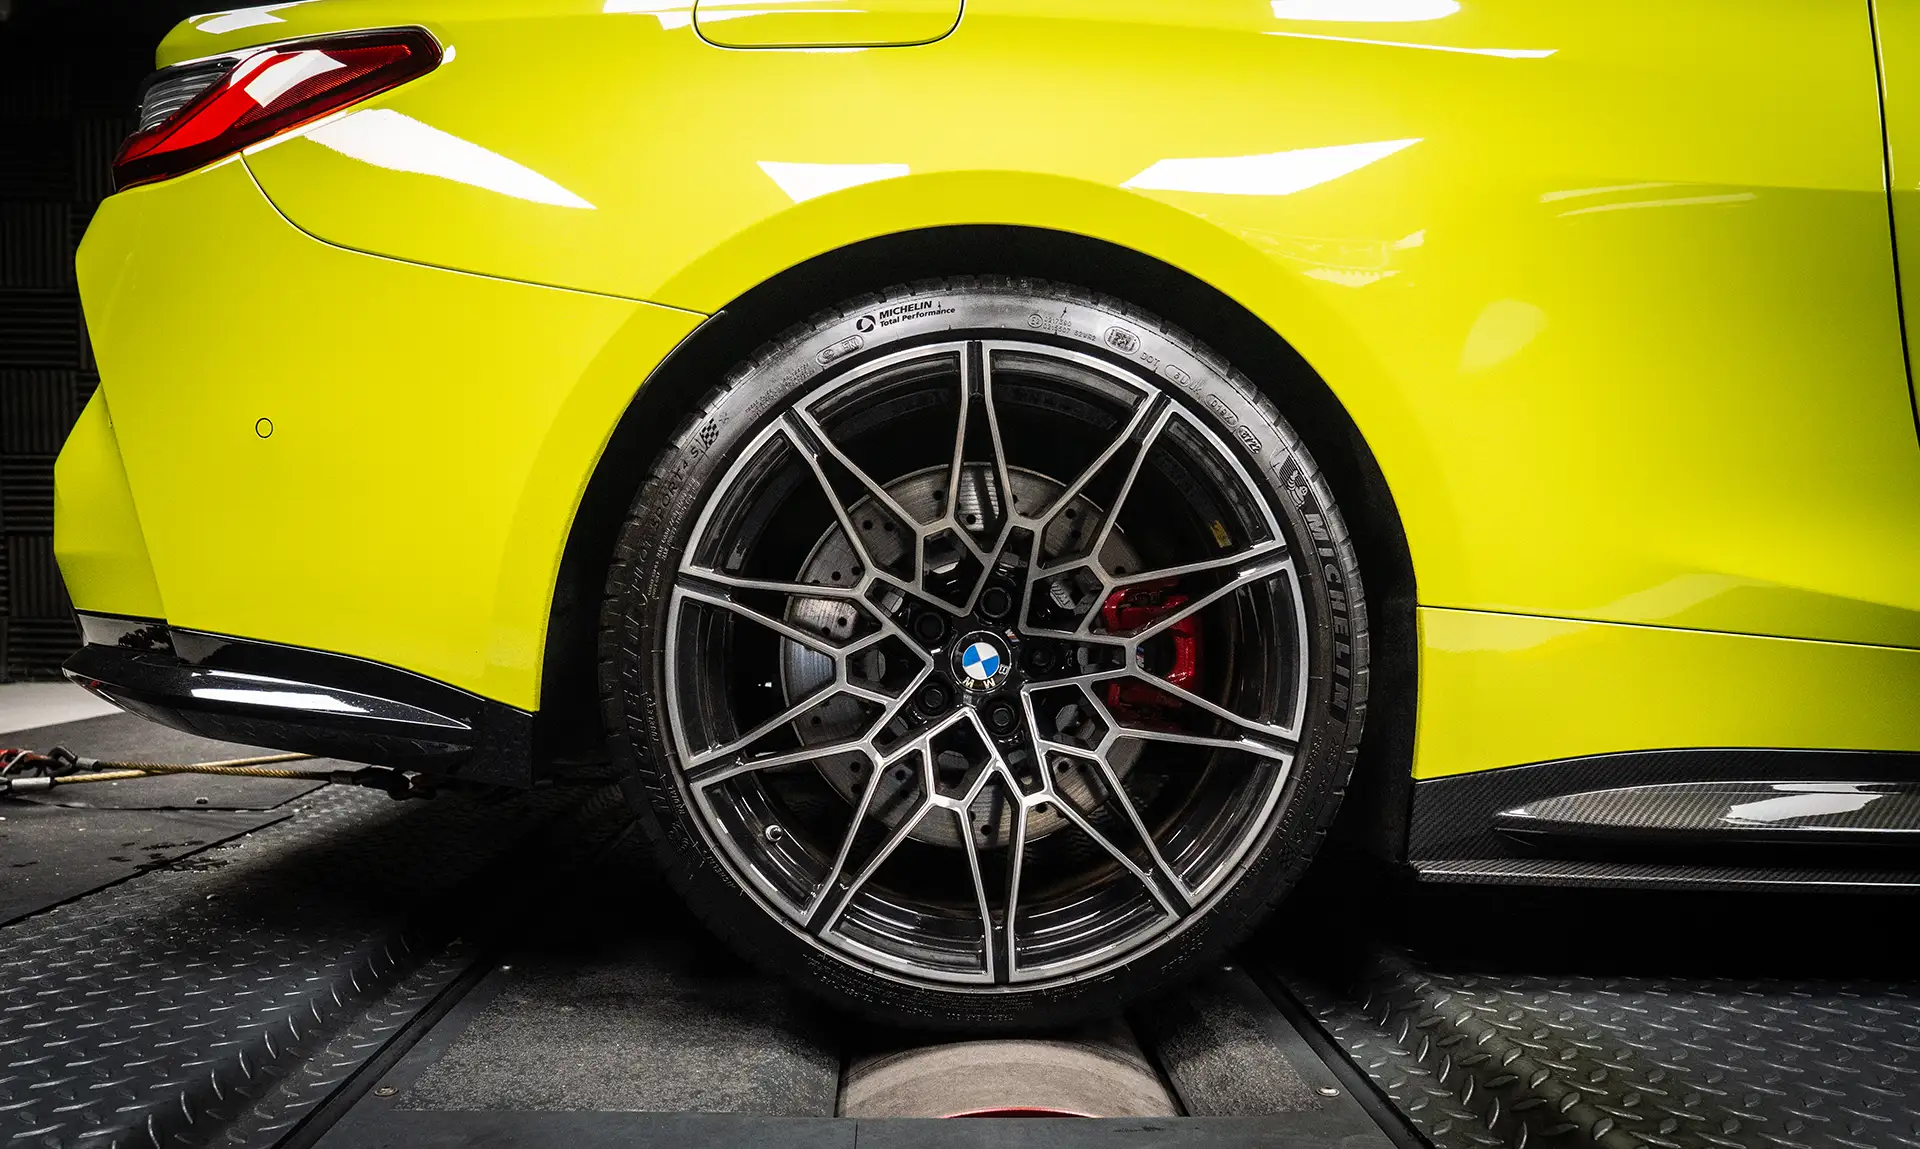 At Hybrid Tune you’re never going to see us advertising and selling a product without guaranteed backed dyno results, road testing and circuit testing. Yellow BMW G82 M4 having development work done on the dyno with our new tuning box. It is a close up shot of the tear wheel on a roller. The car is bright yellow, and the wheel is spoked silver with a red brake caliper. The background id dark grey